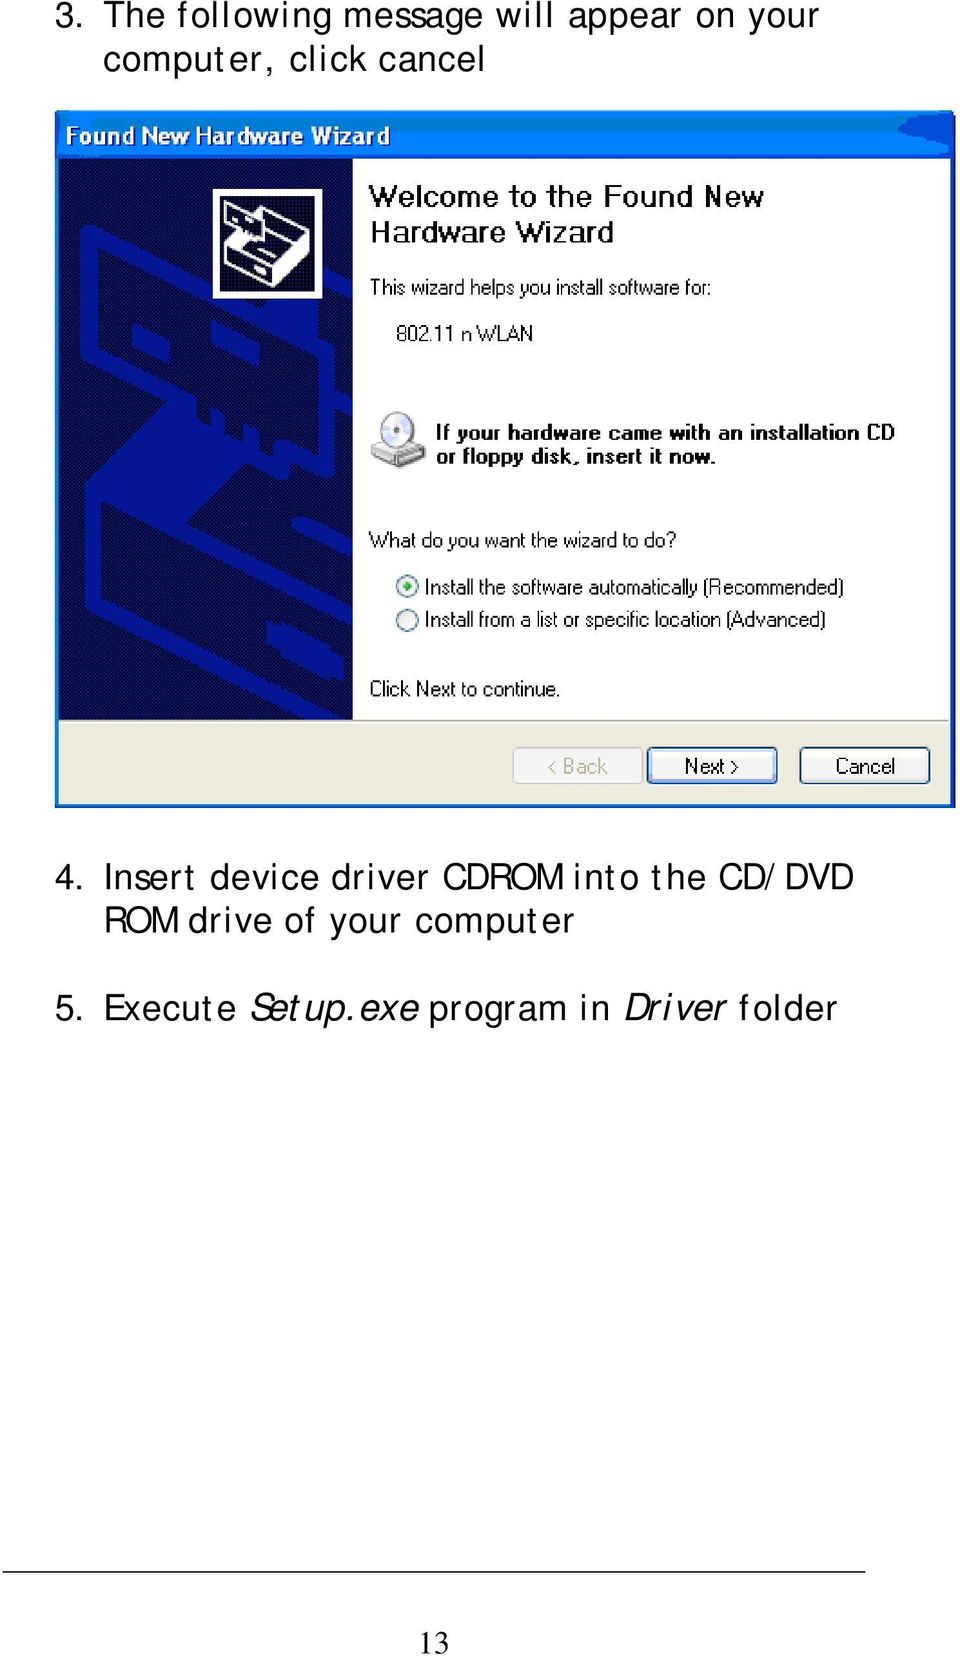 Insert device driver CDROM into the CD/DVD ROM